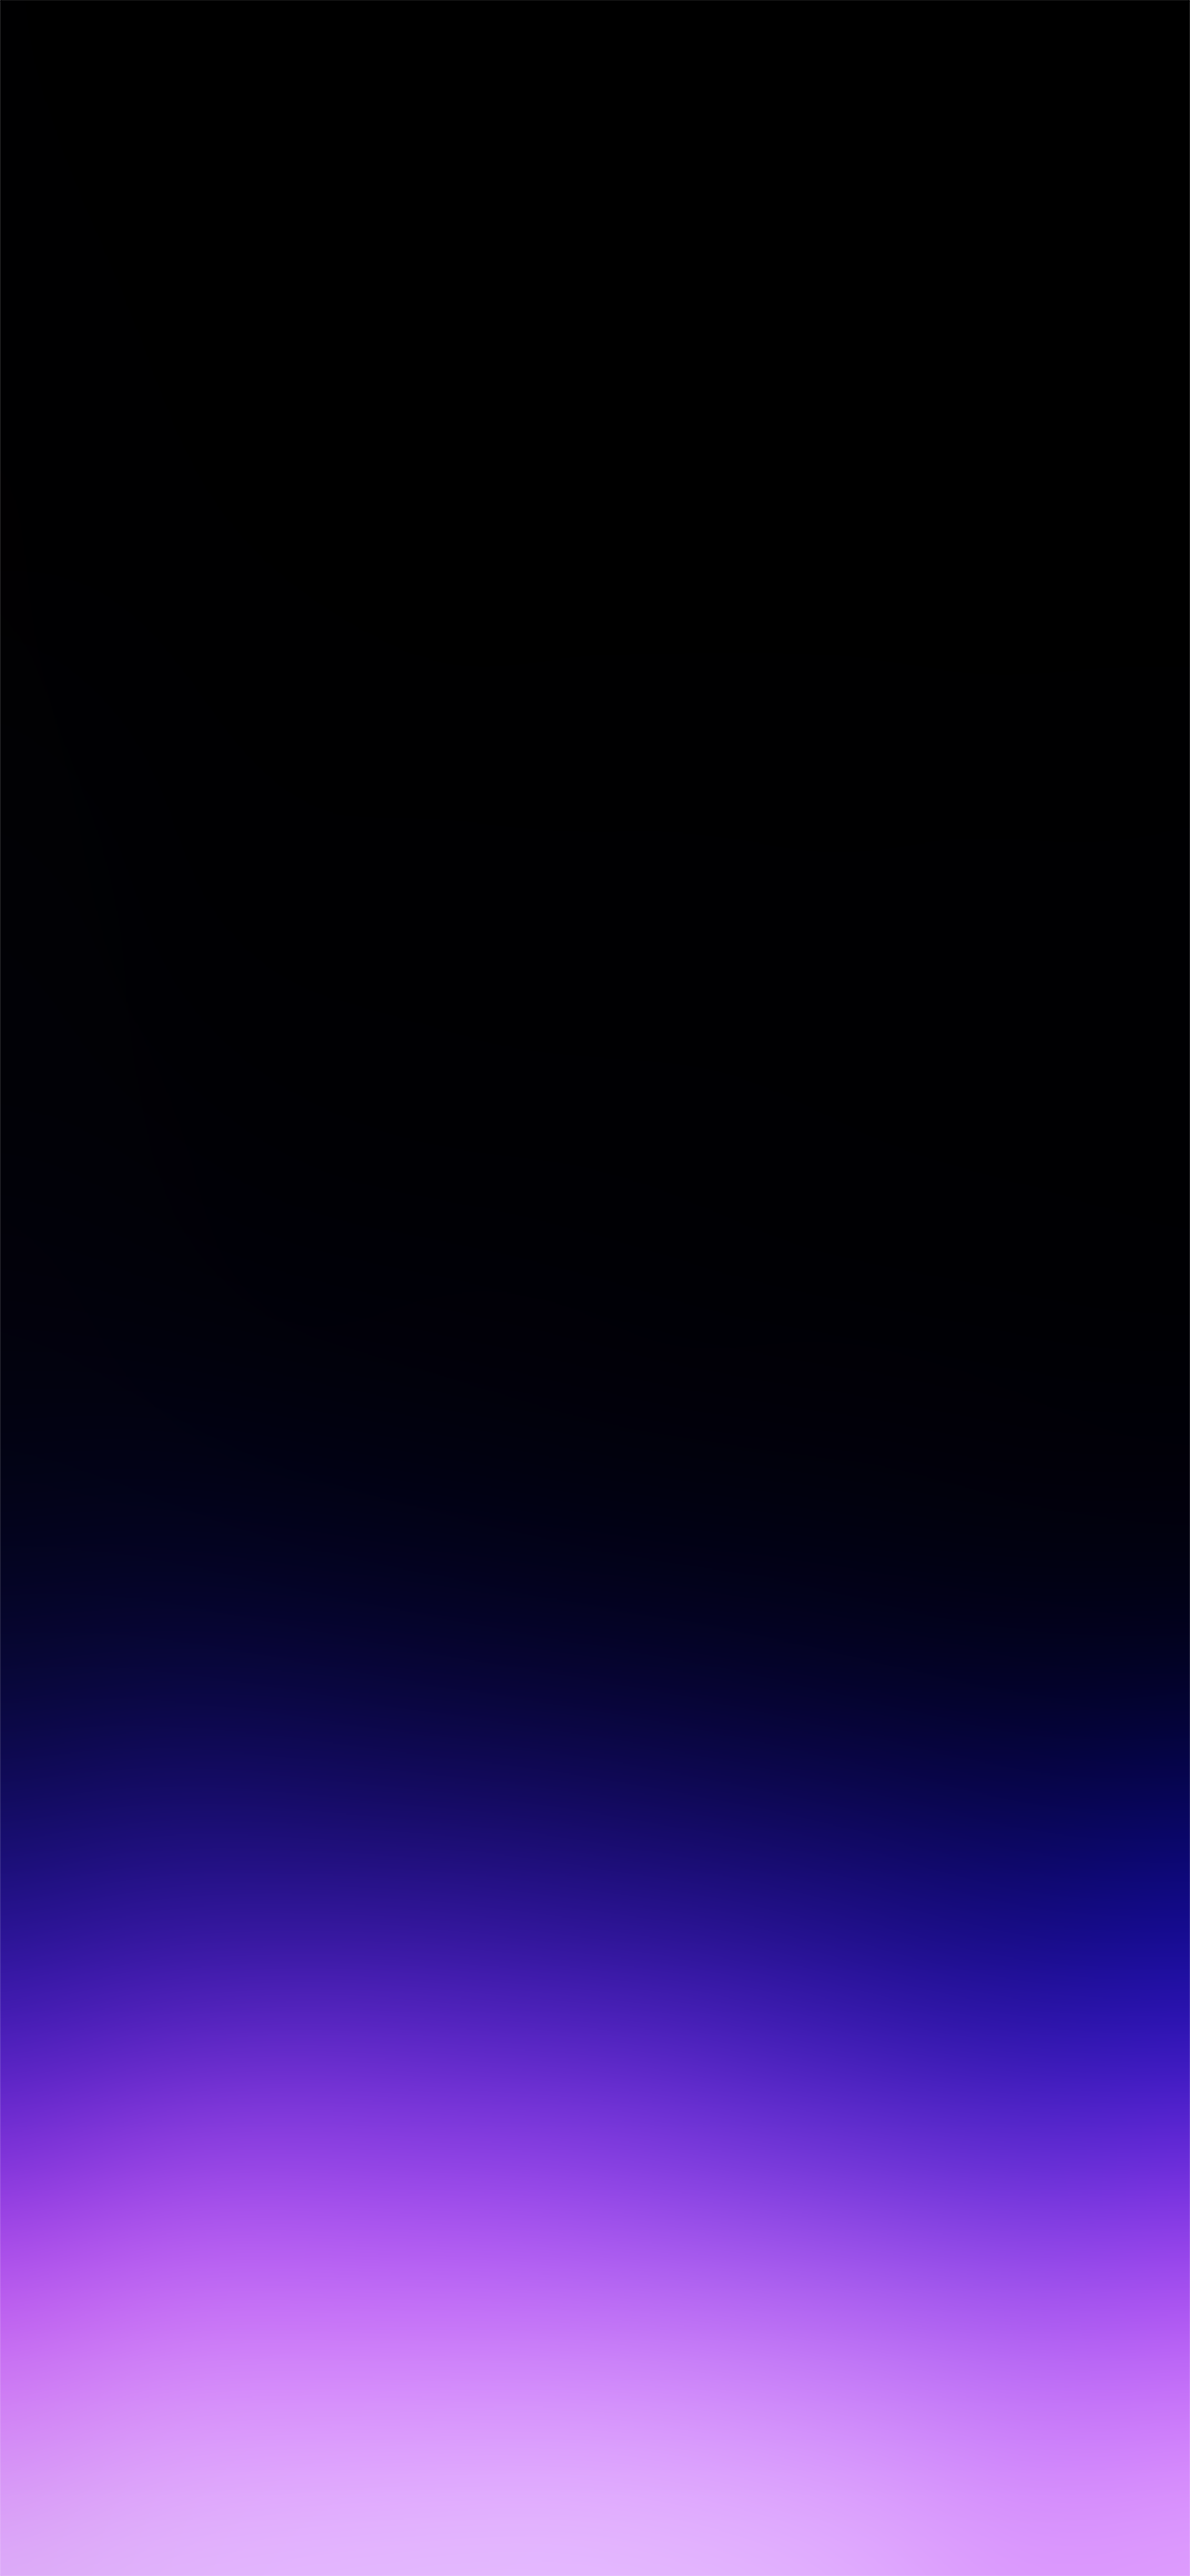 Iphone Wallpapers Black And Blue